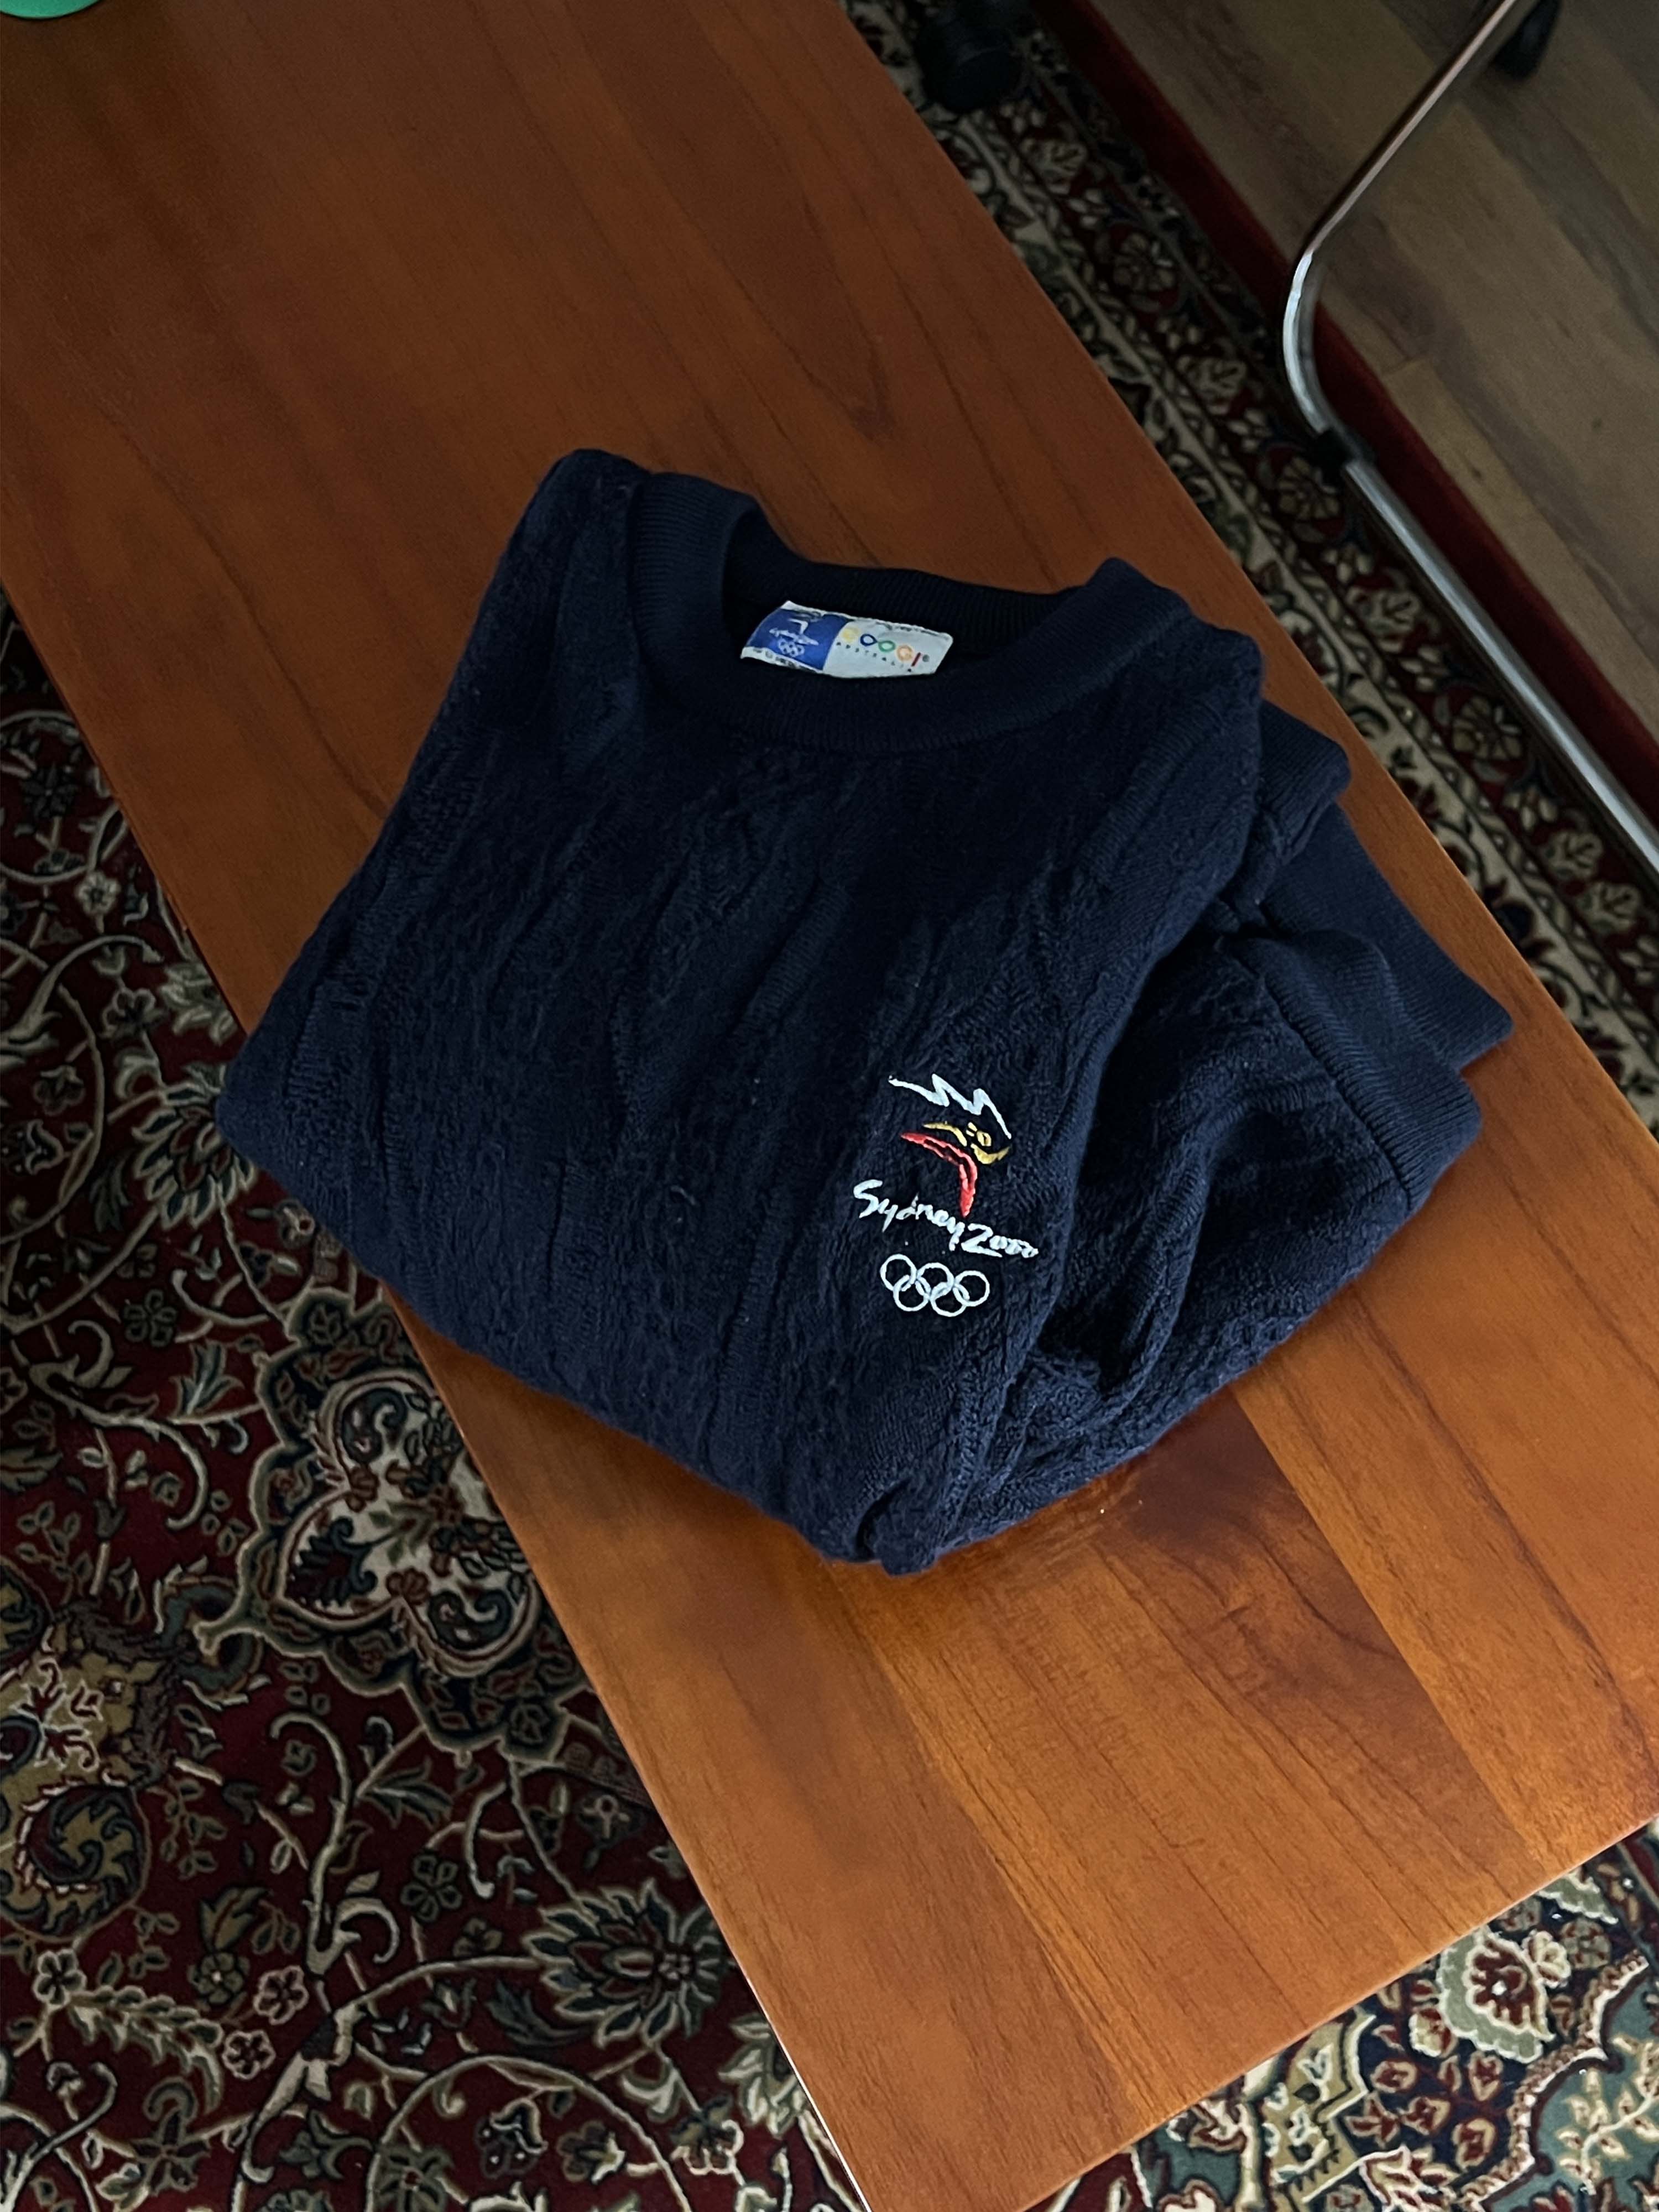 90s COOGI cable knit for  australia sydney olympic